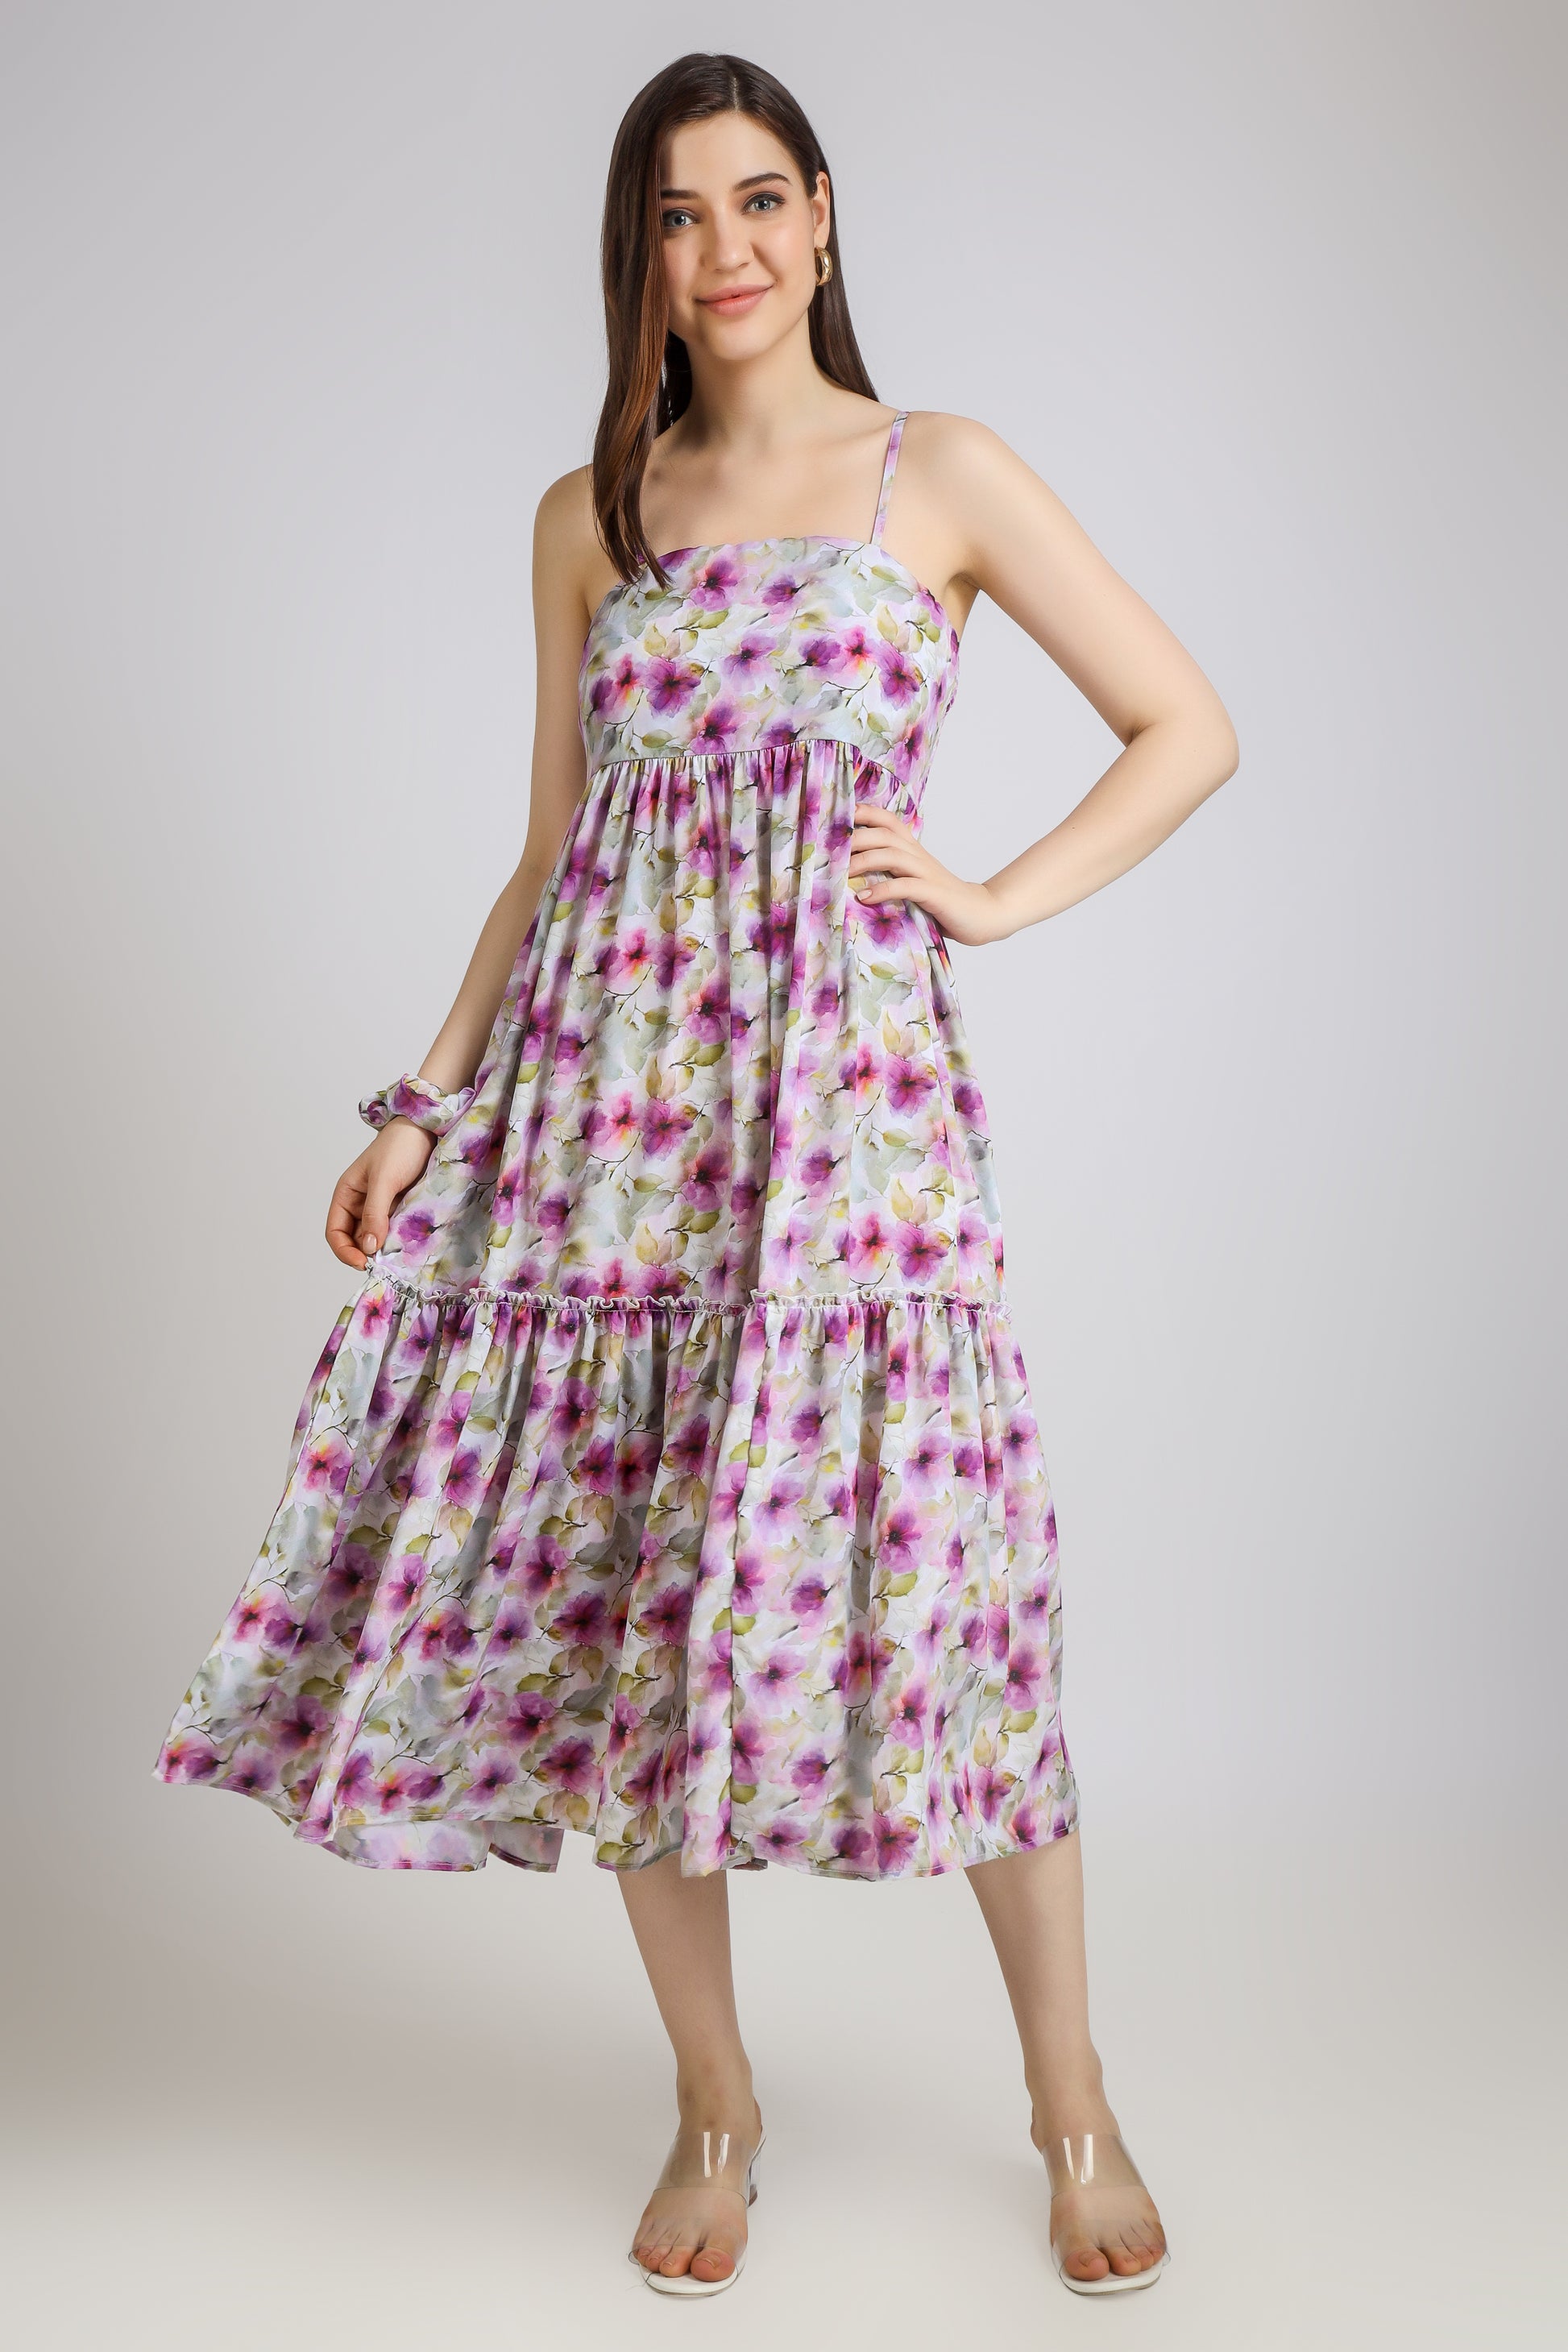 Vomendi Floral Tie and Dye Print Dress with Smocking and Detachable Sleeves